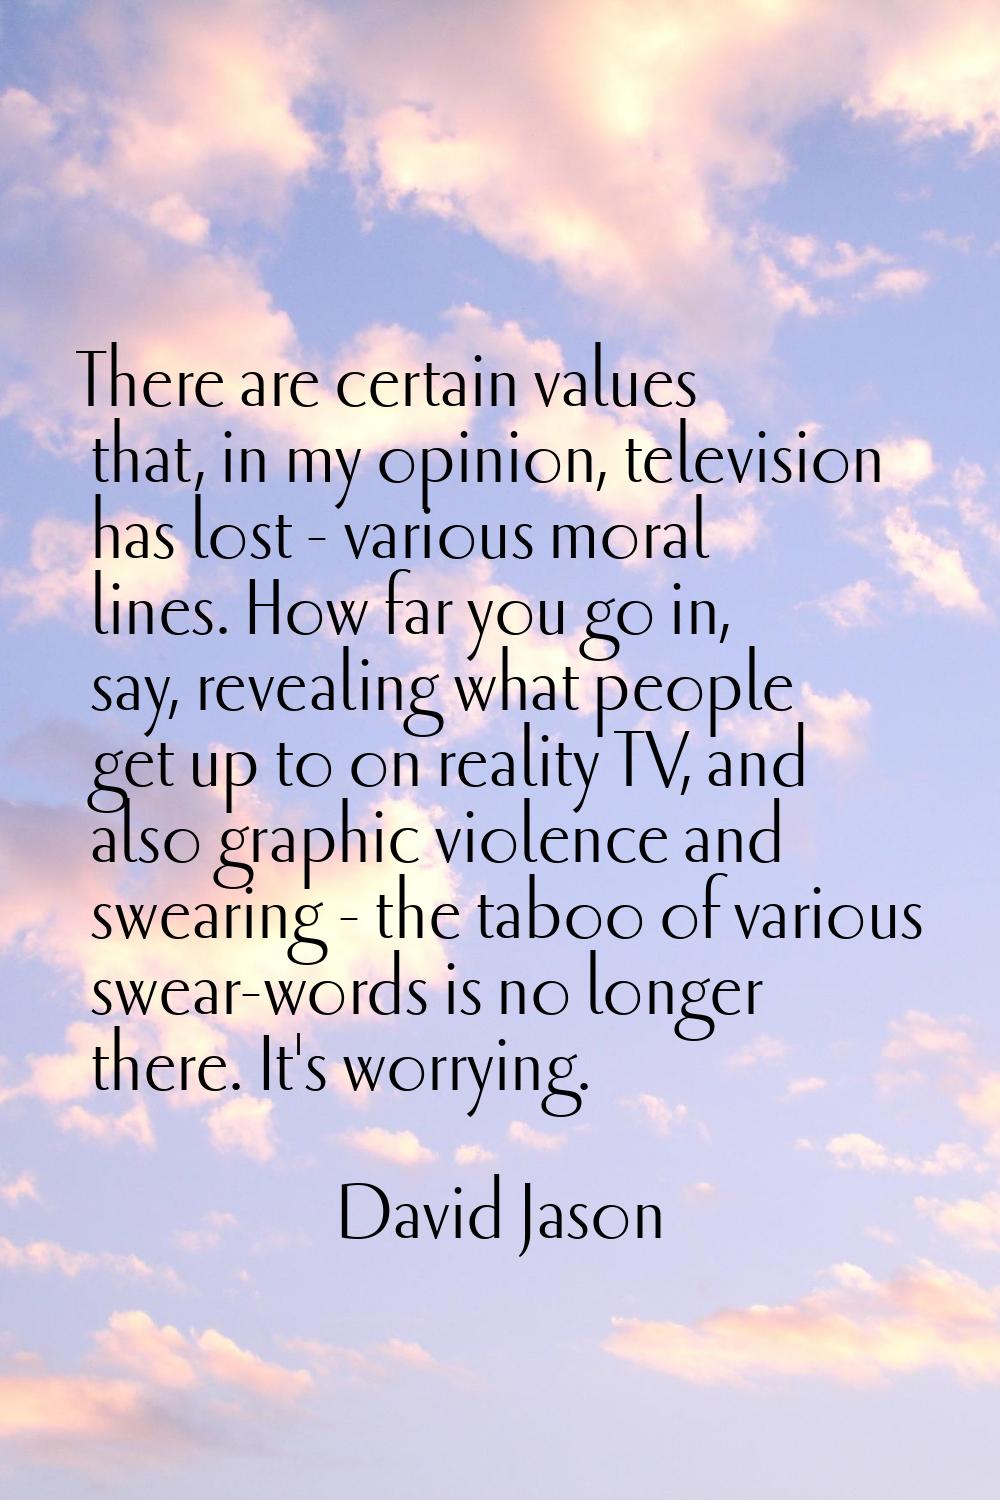 There are certain values that, in my opinion, television has lost - various moral lines. How far yo